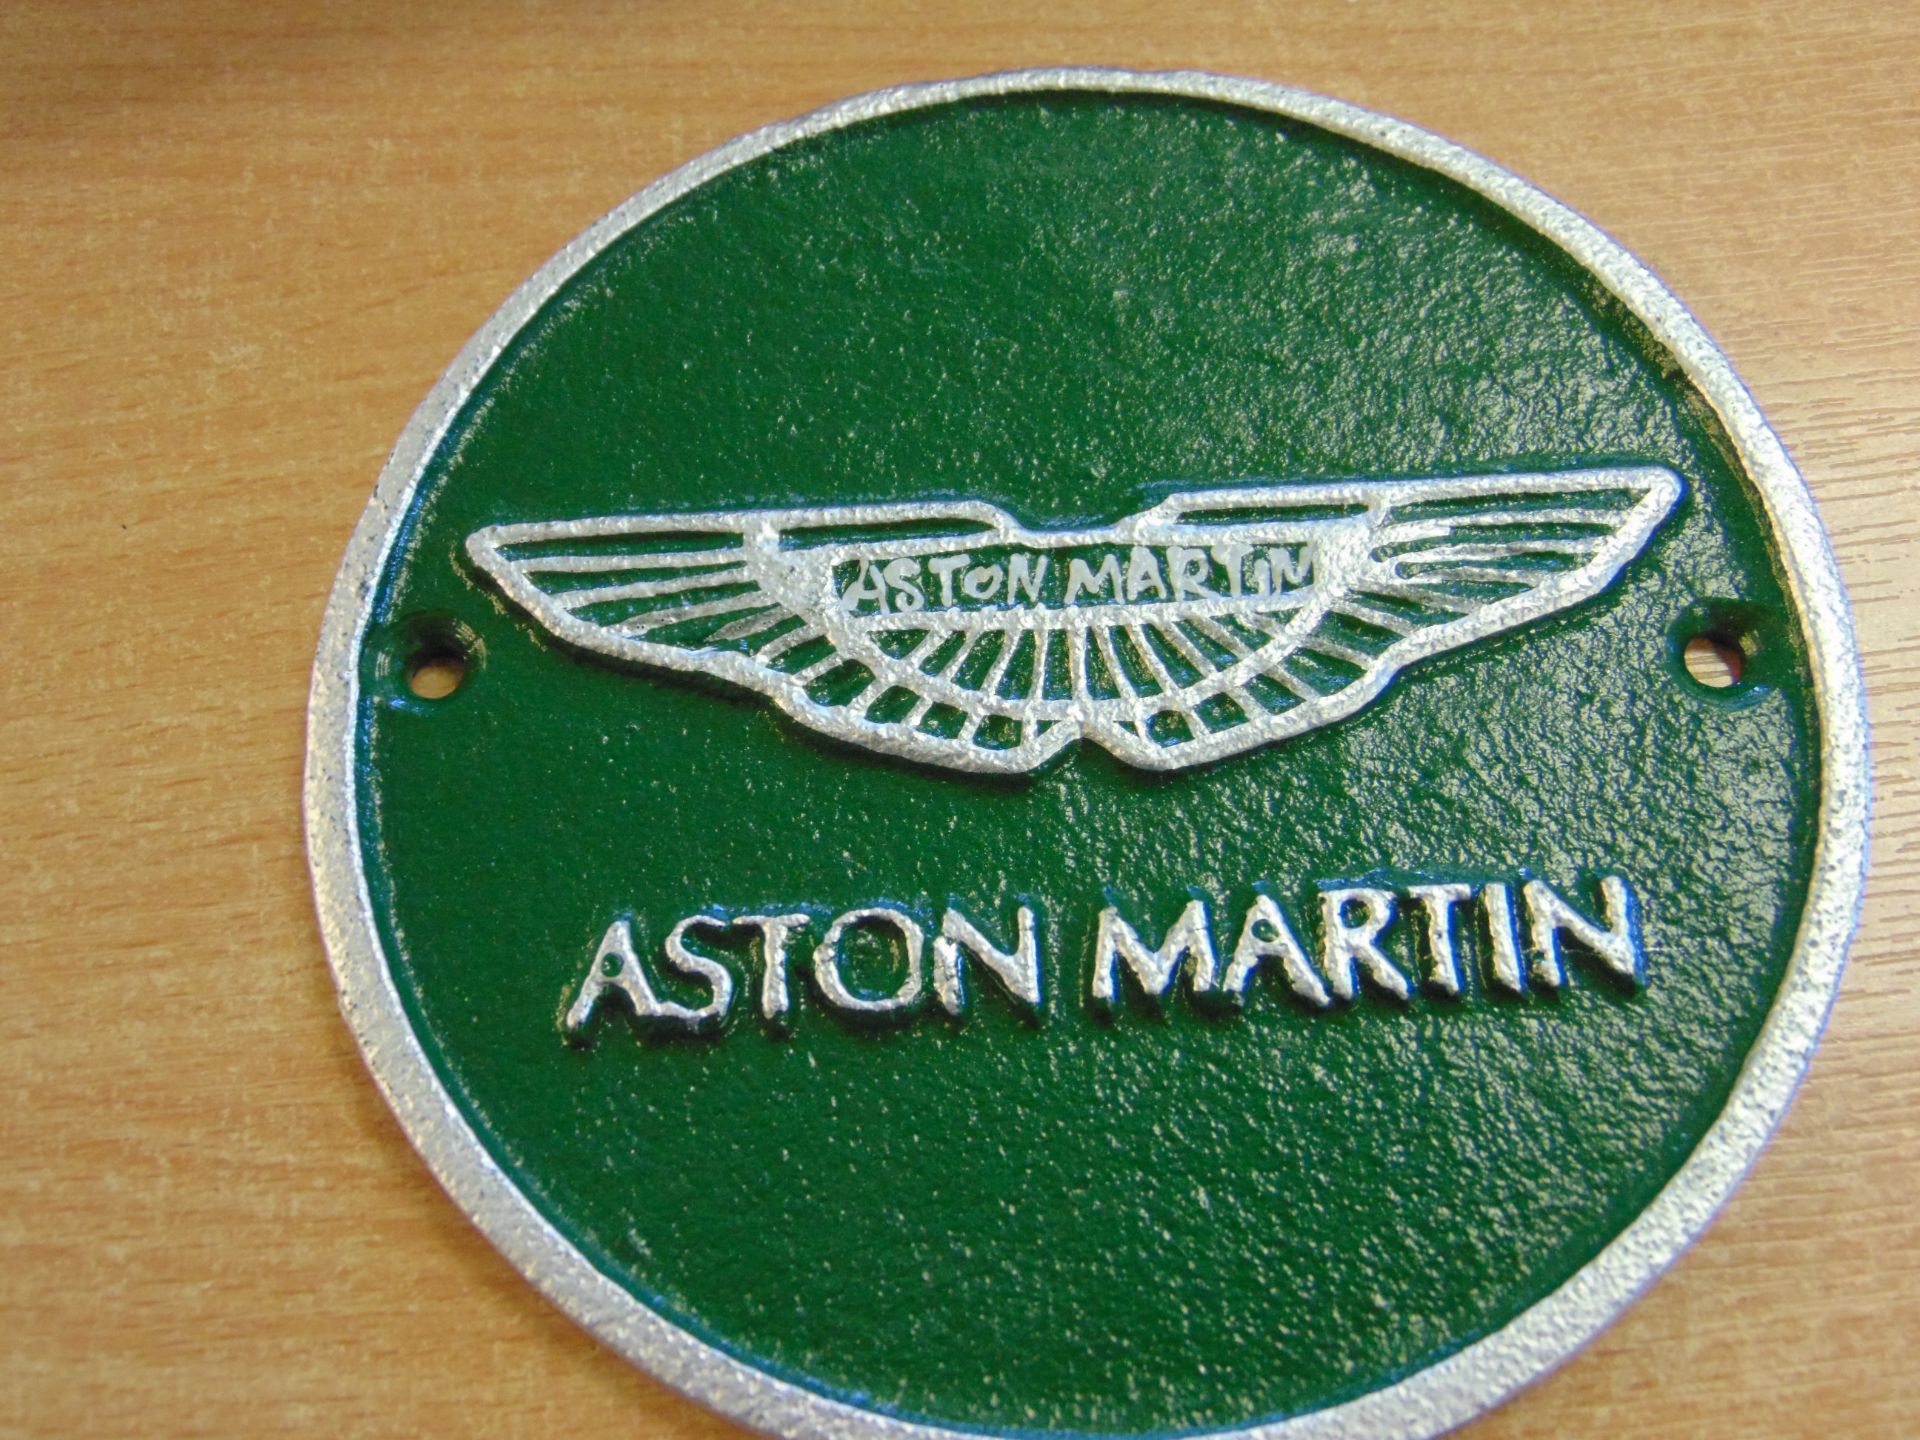 ASTON MARTIN HAND PAINTED CAST IRON WALL PLAQUE 12CMS DIA. - Image 3 of 4